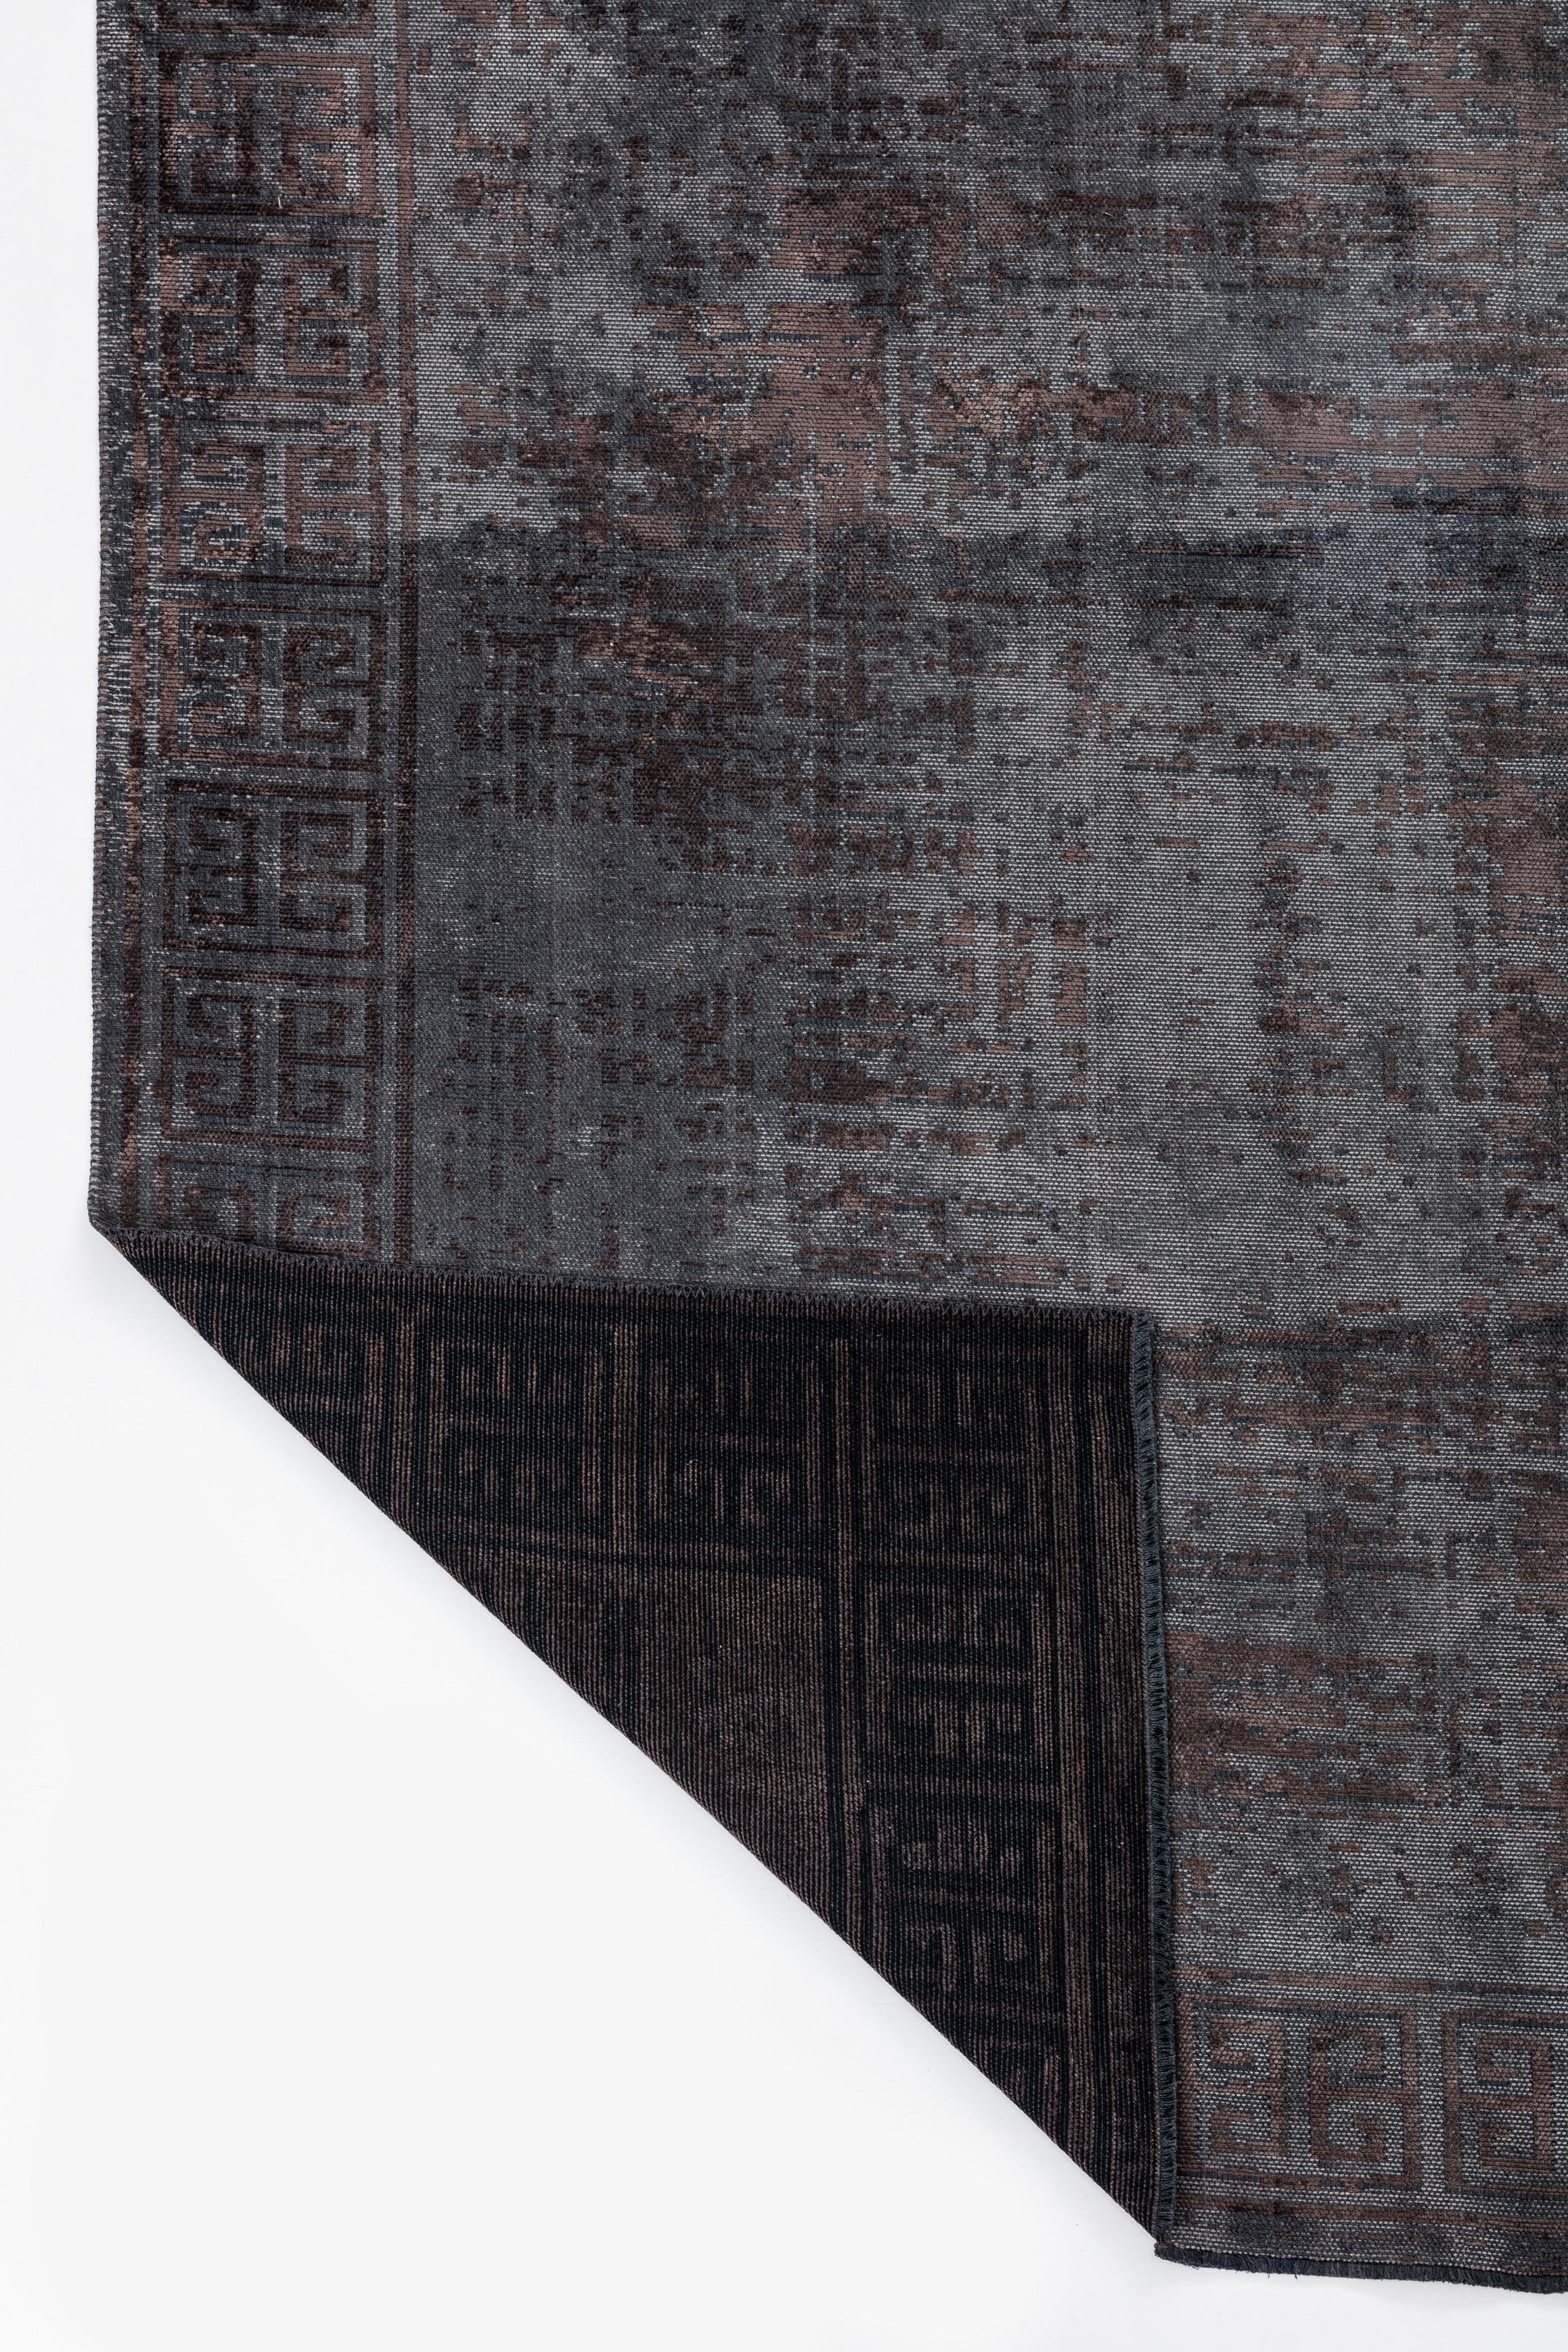 For Sale:  (Brown) Modern Camouflage Luxury Area Rug 3